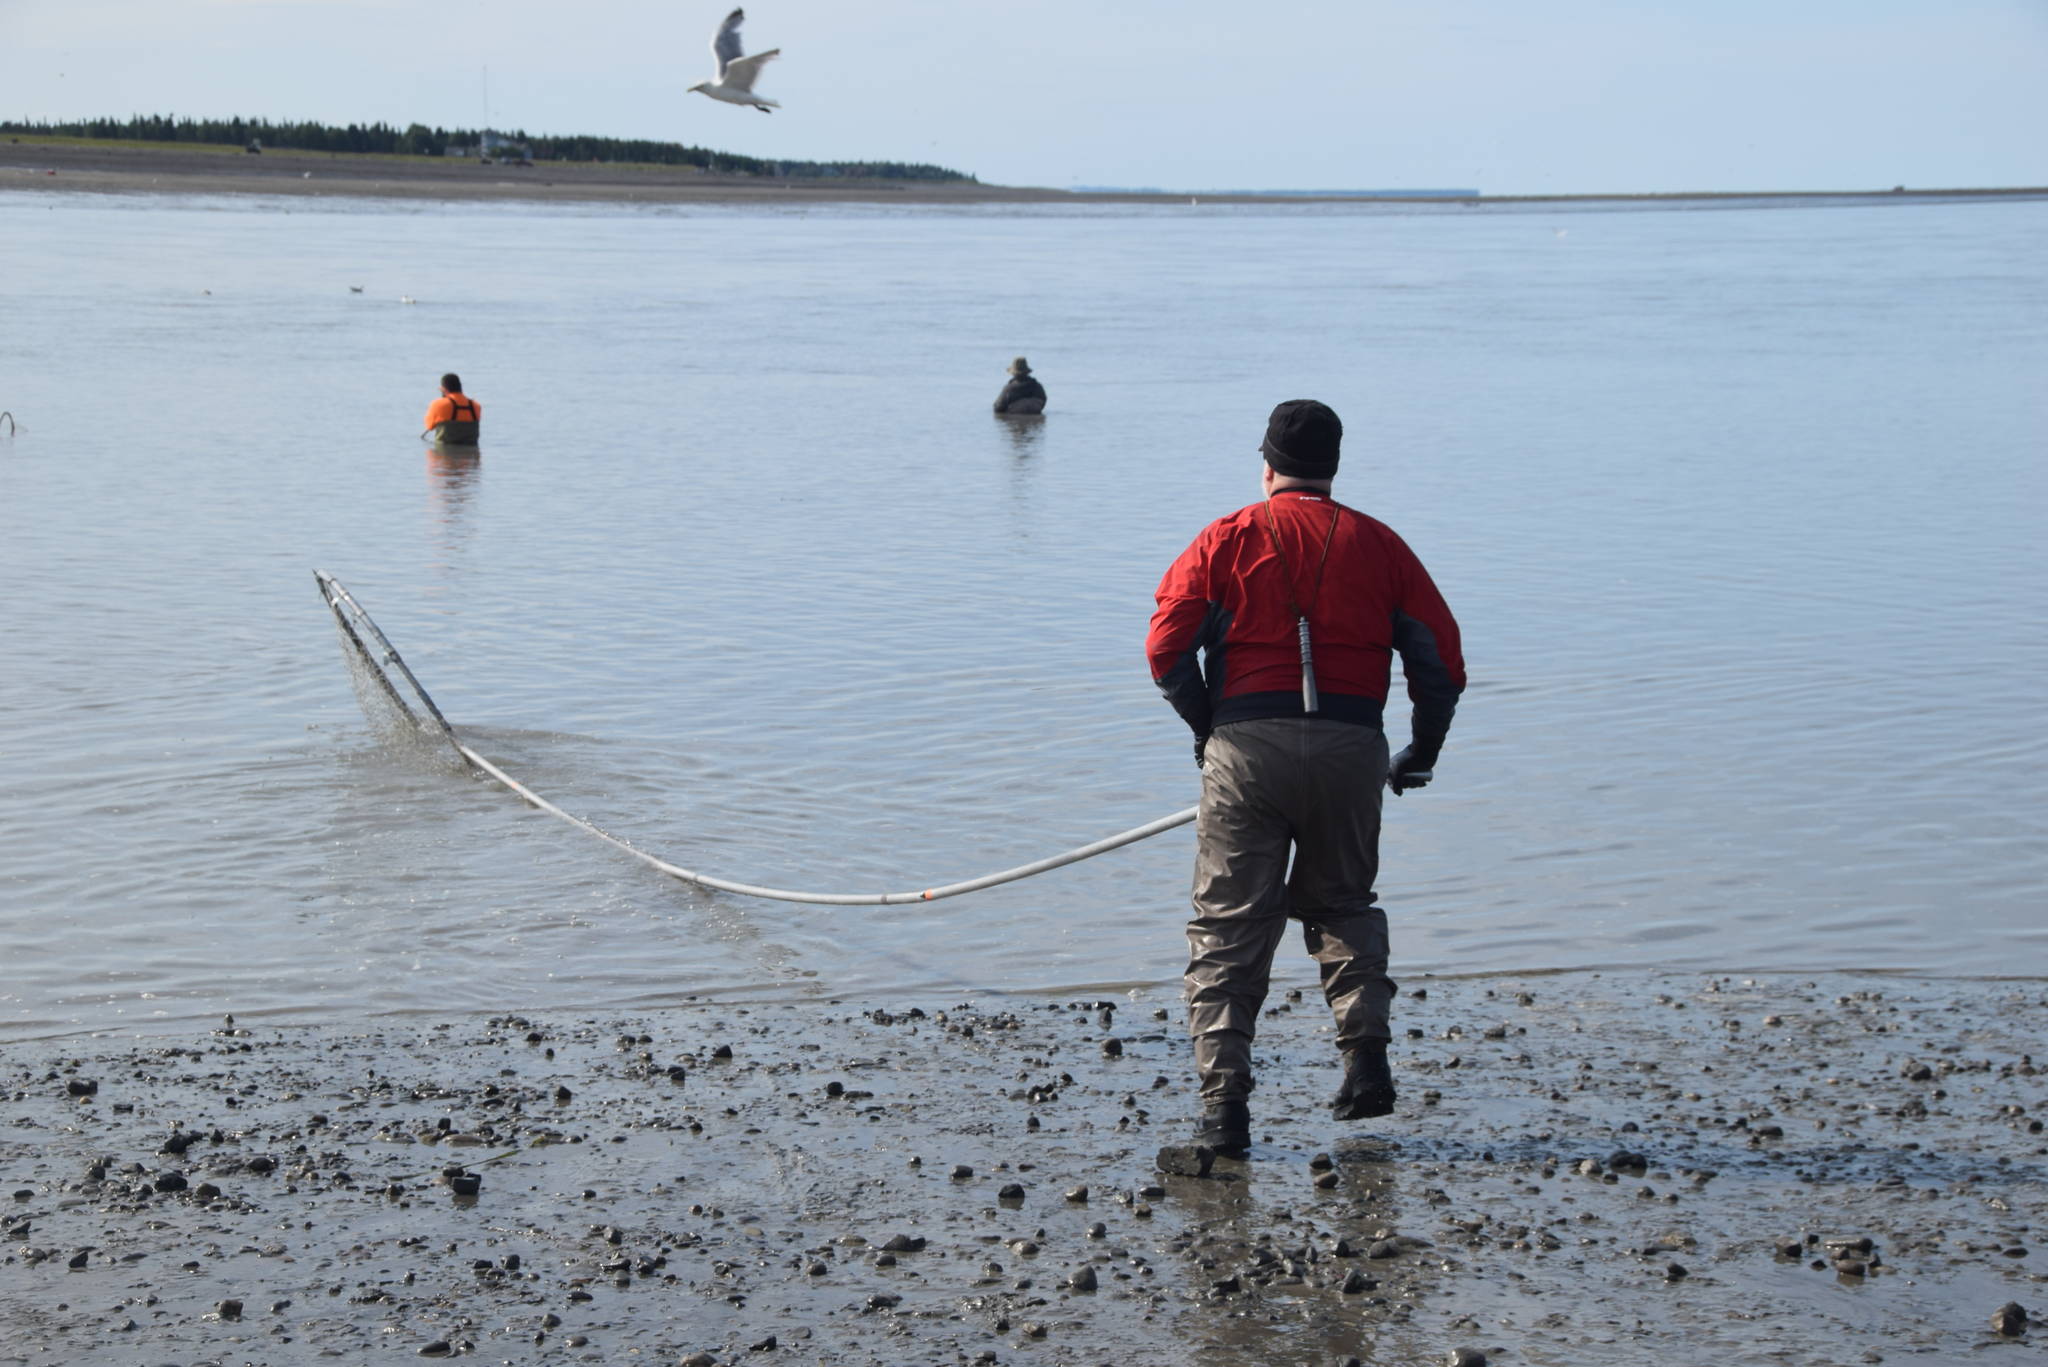 John Hakla from Eagle River heads back into the water while dip netting on the North Kenai Beach on July 17, 2019. (Photo by Brian Mazurek/Peninsula Clarion)